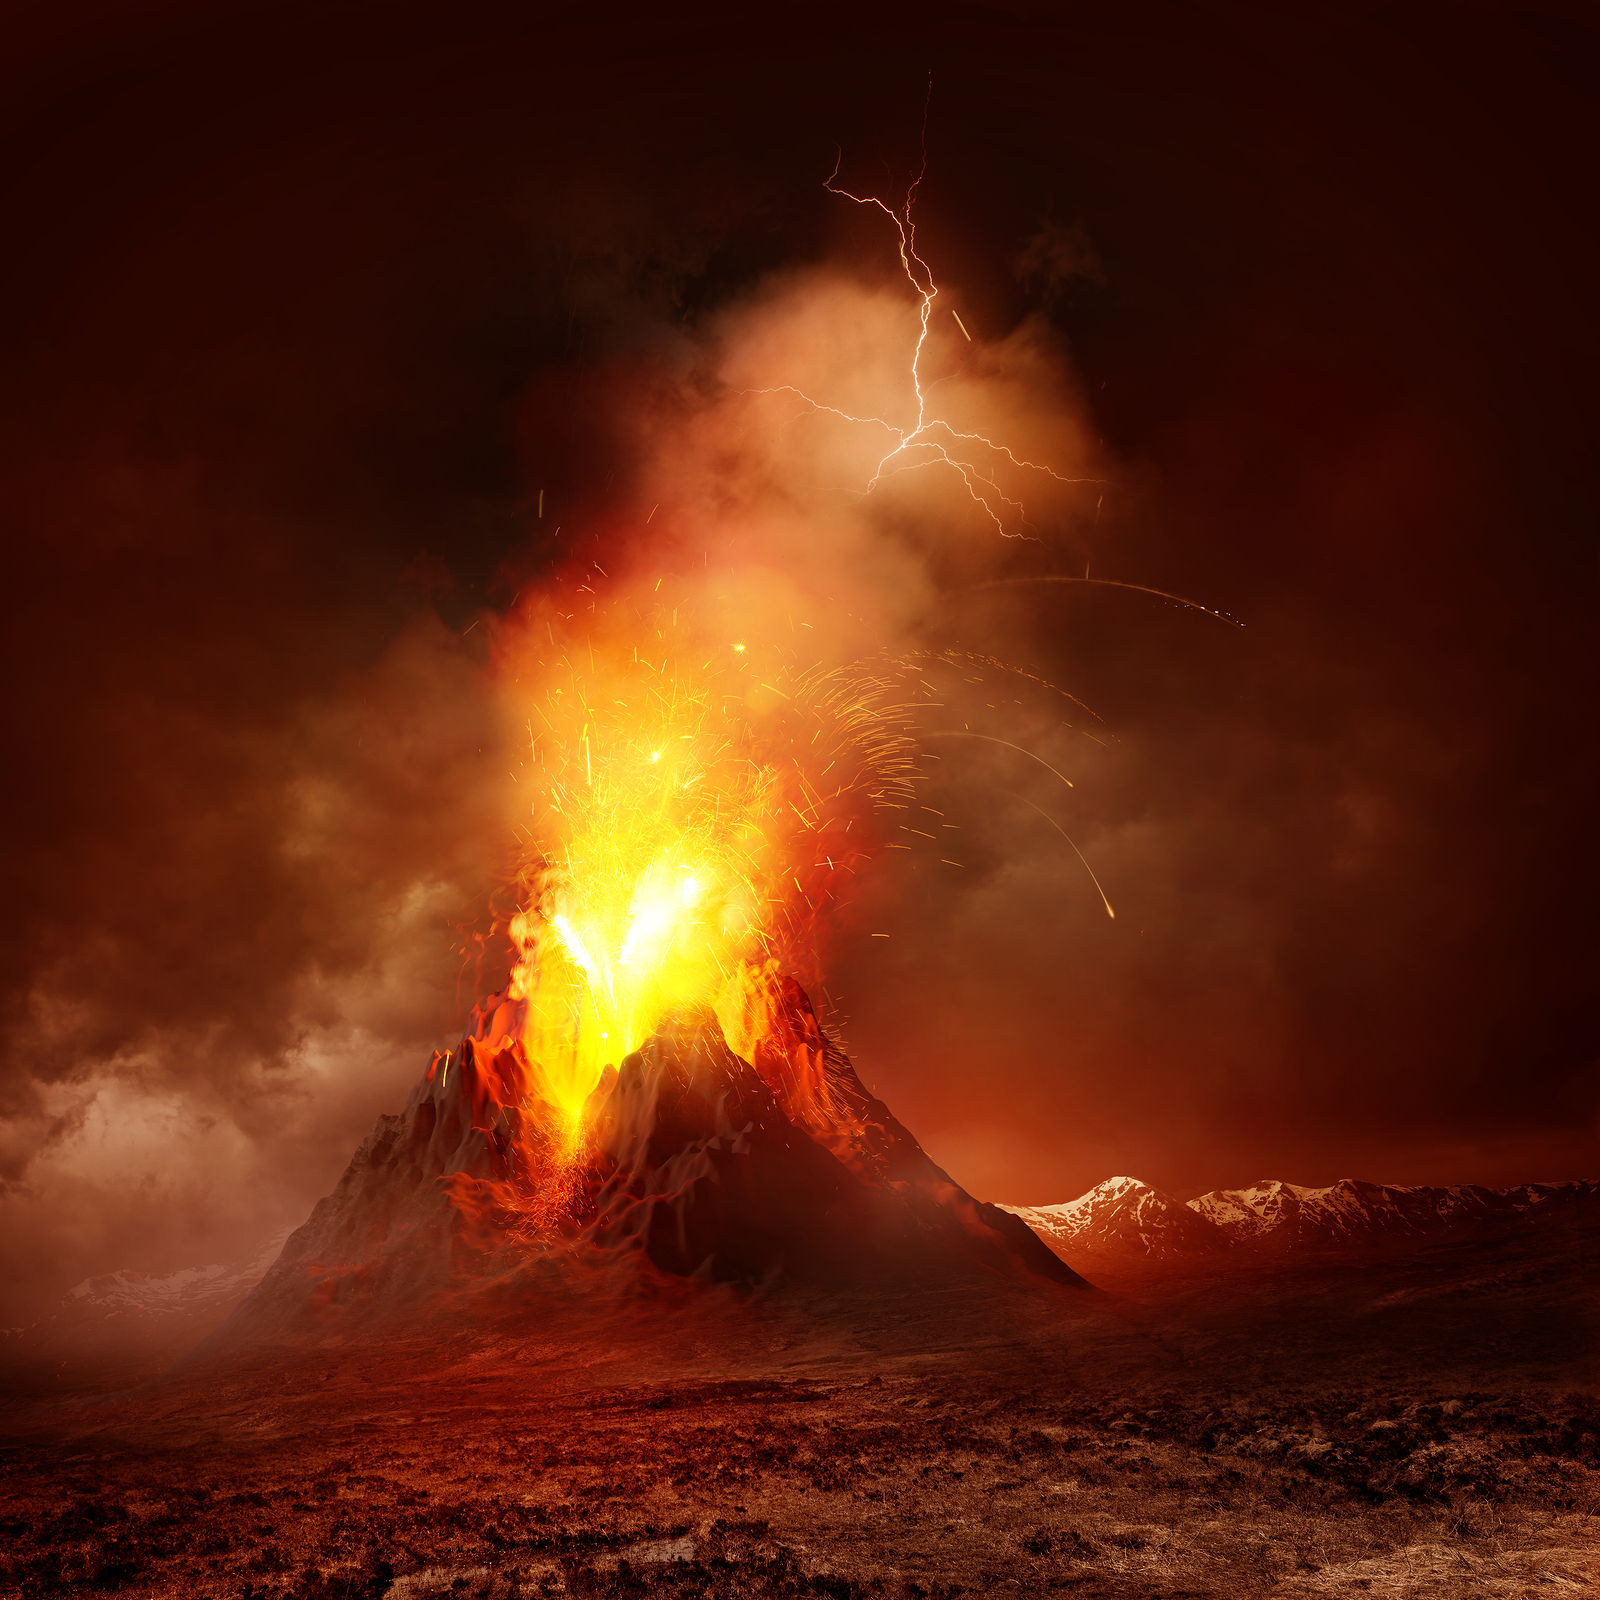 Volcano Eruption. A large volcano erupting hot lava and gases into the atmosphere. Illustration.